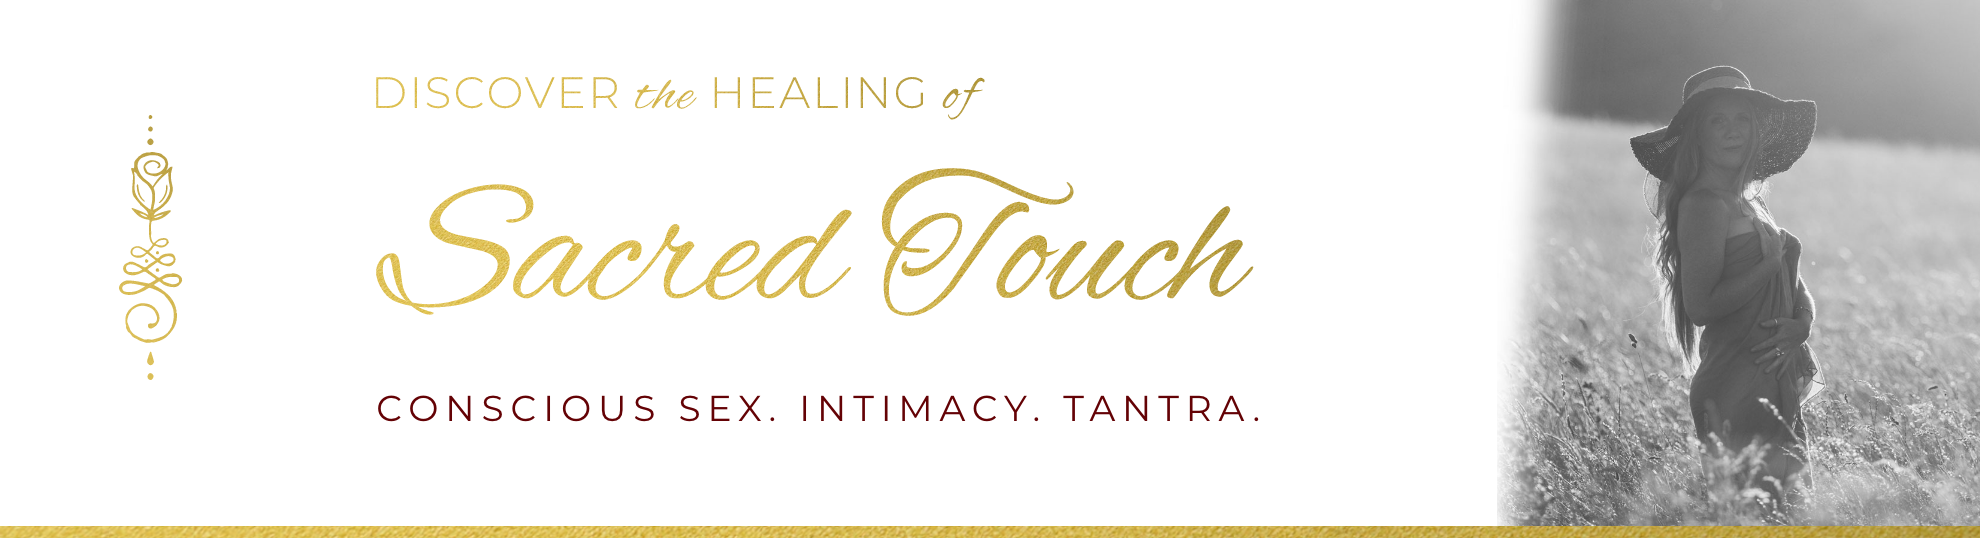 SACRED TOUCH BANNER